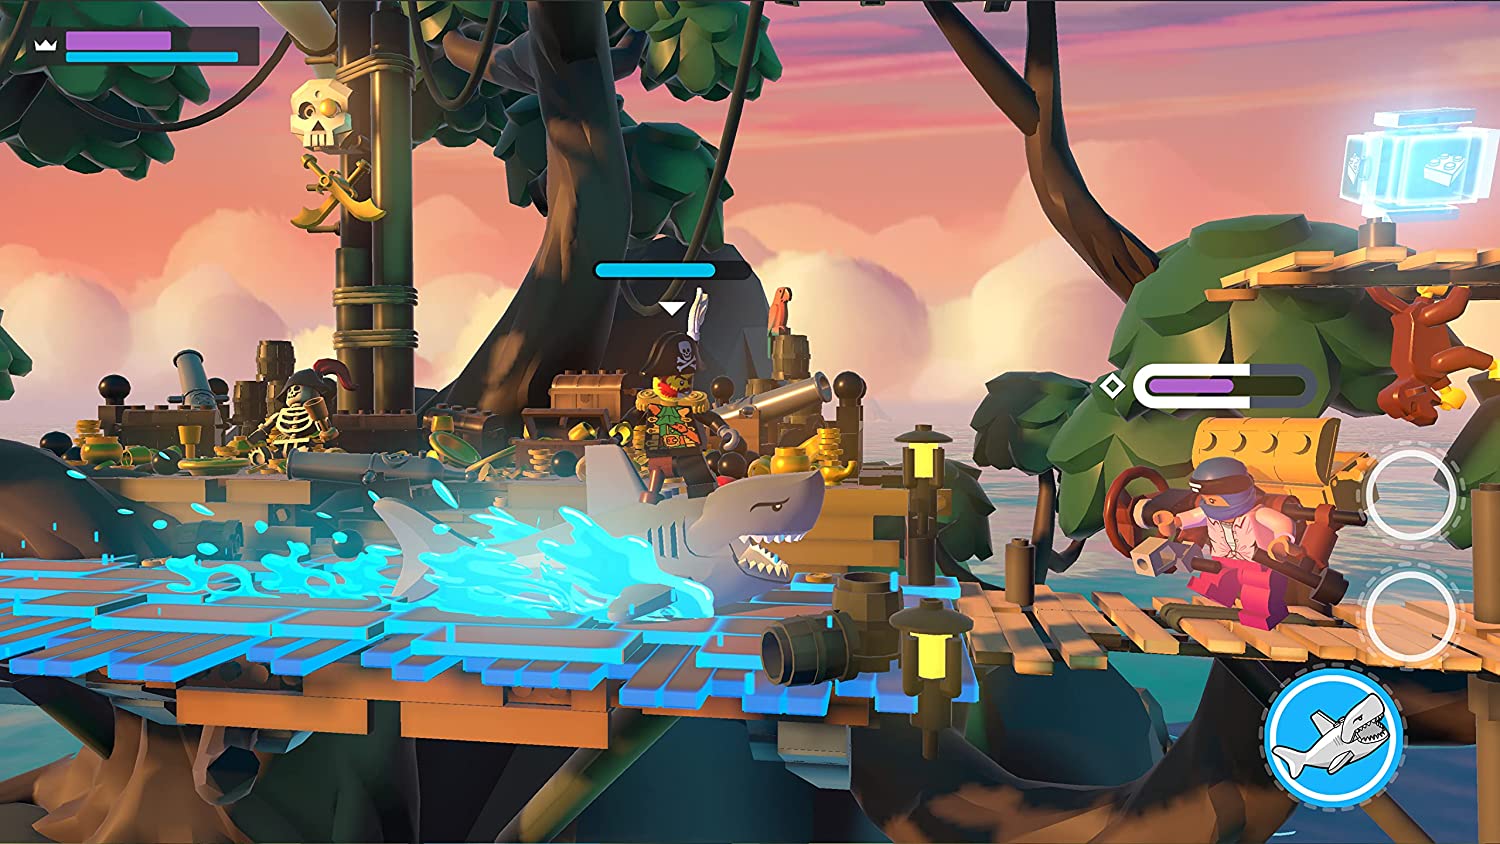 Image for Smash Bros-like Lego Brawls is coming to consoles in September